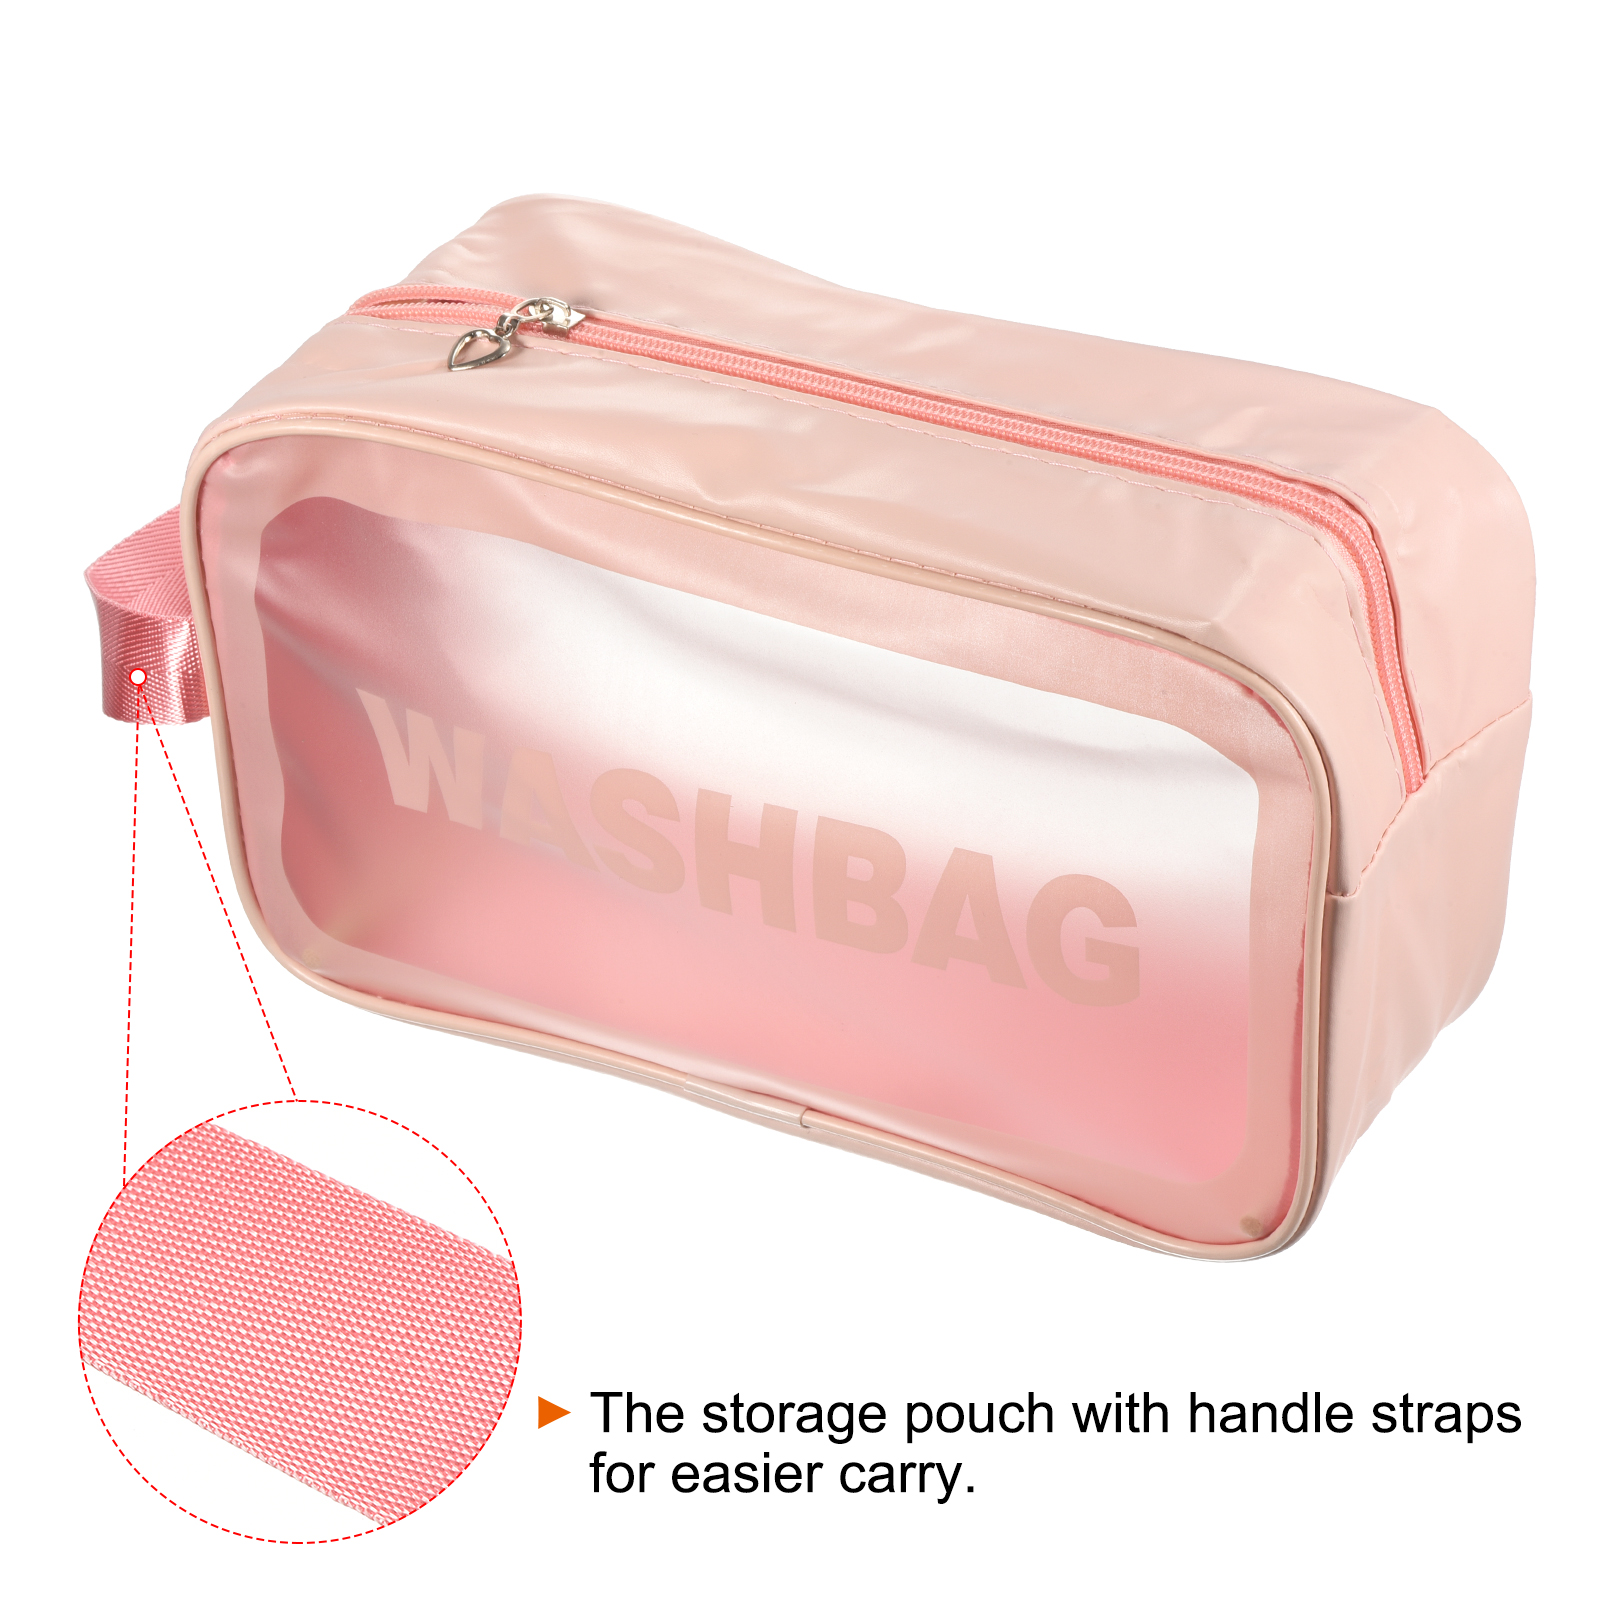 Uxcell 5.9"x9.8"x3.7" PVC Clear Toiletry Bag Makeup Bags with Zipper Handle Pink 3 Pack - image 4 of 5